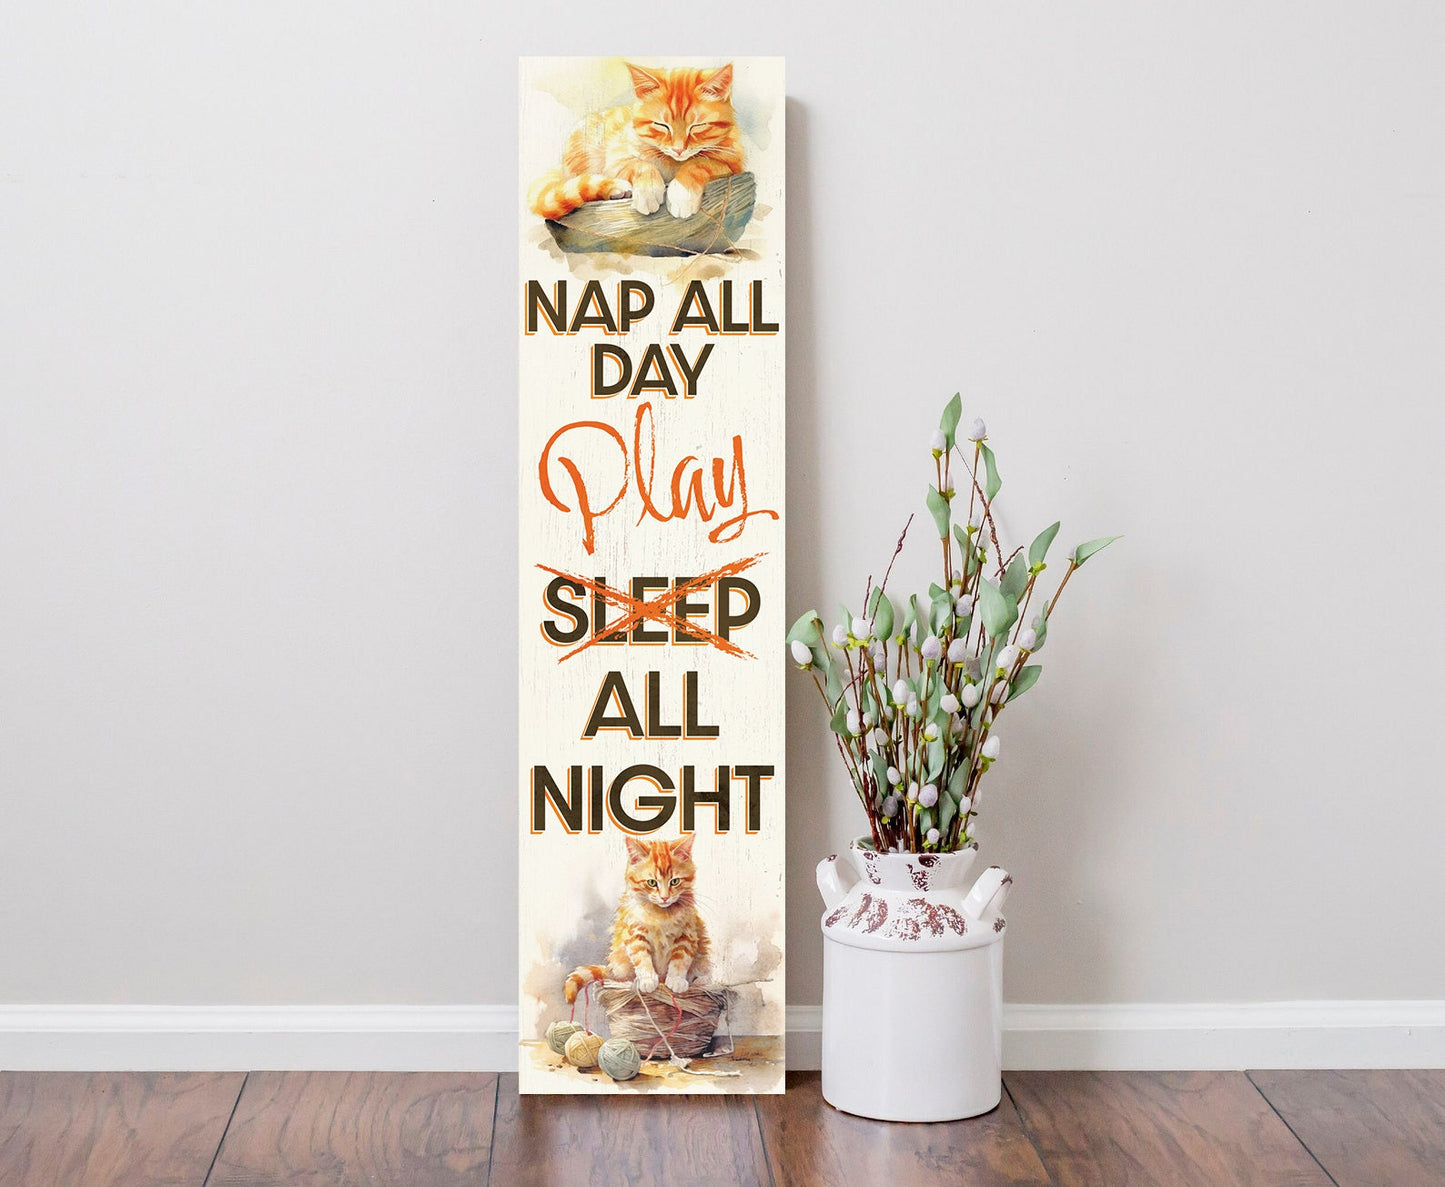 36In Wooden "Nap All Day Play All Night" Wall Sign For Front Door And Outdoor Display With Cat Watercolor Pattern Fun Door Sign